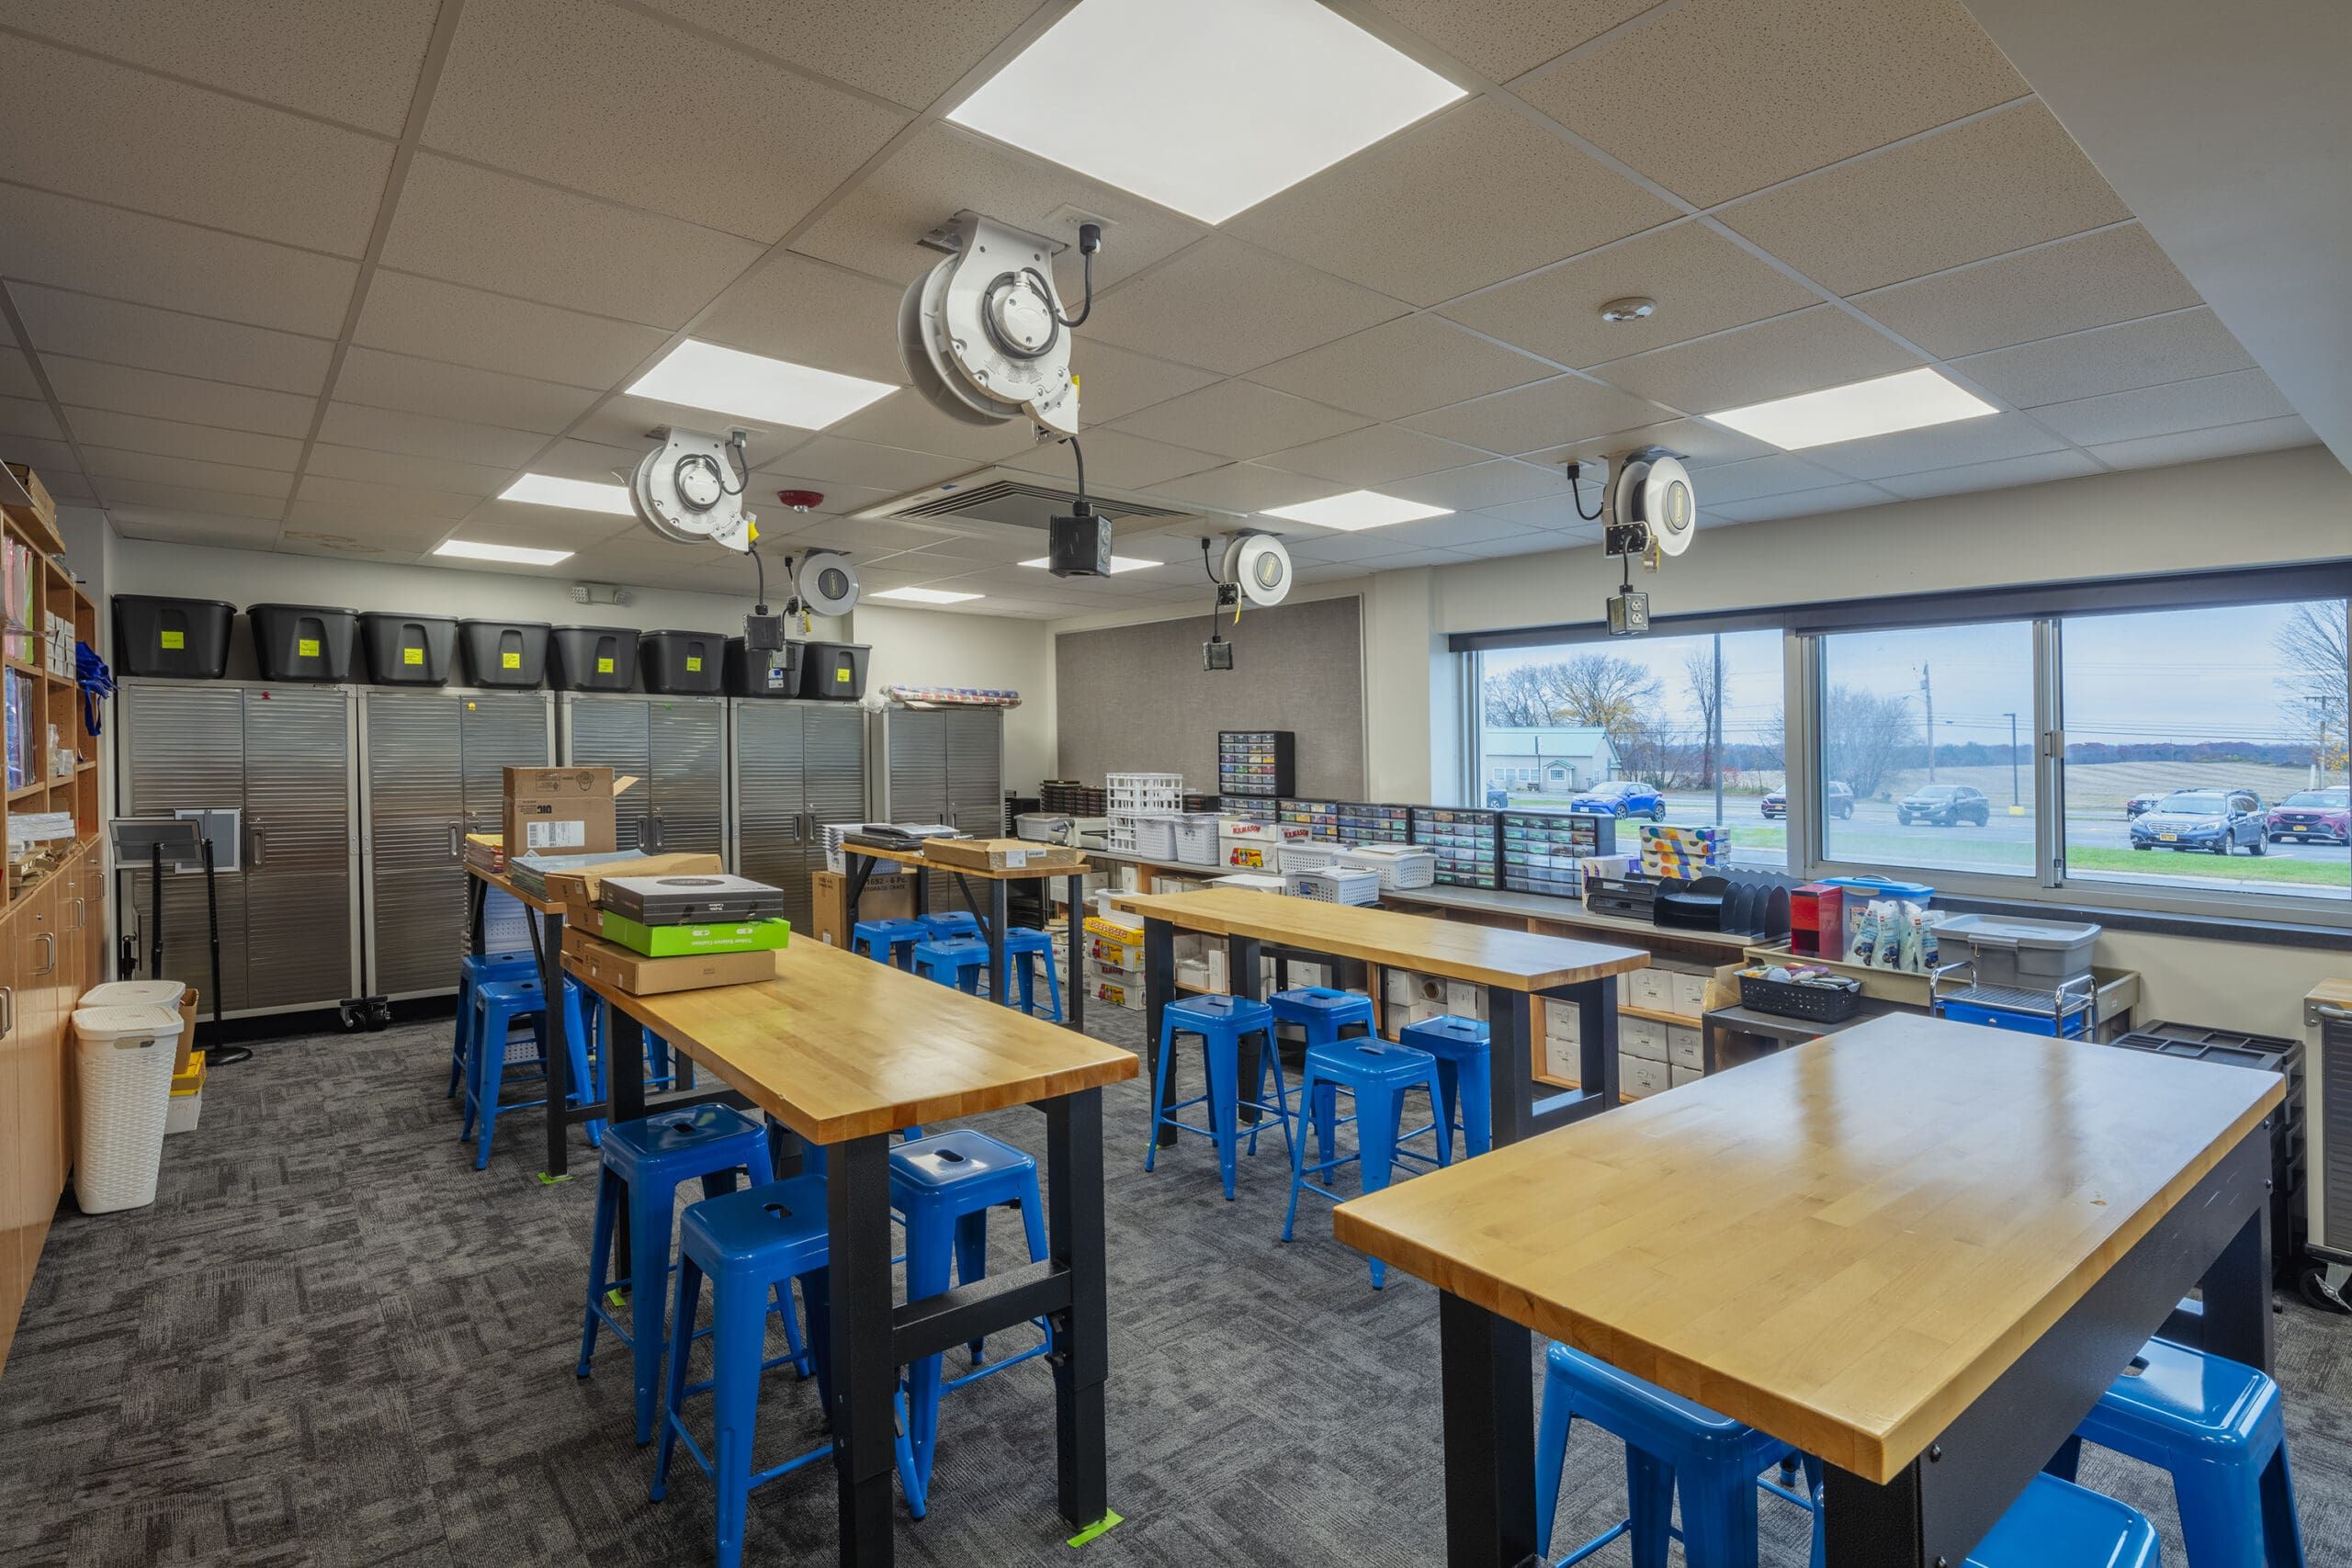 Modern school art classroom with tables and storage shelves.